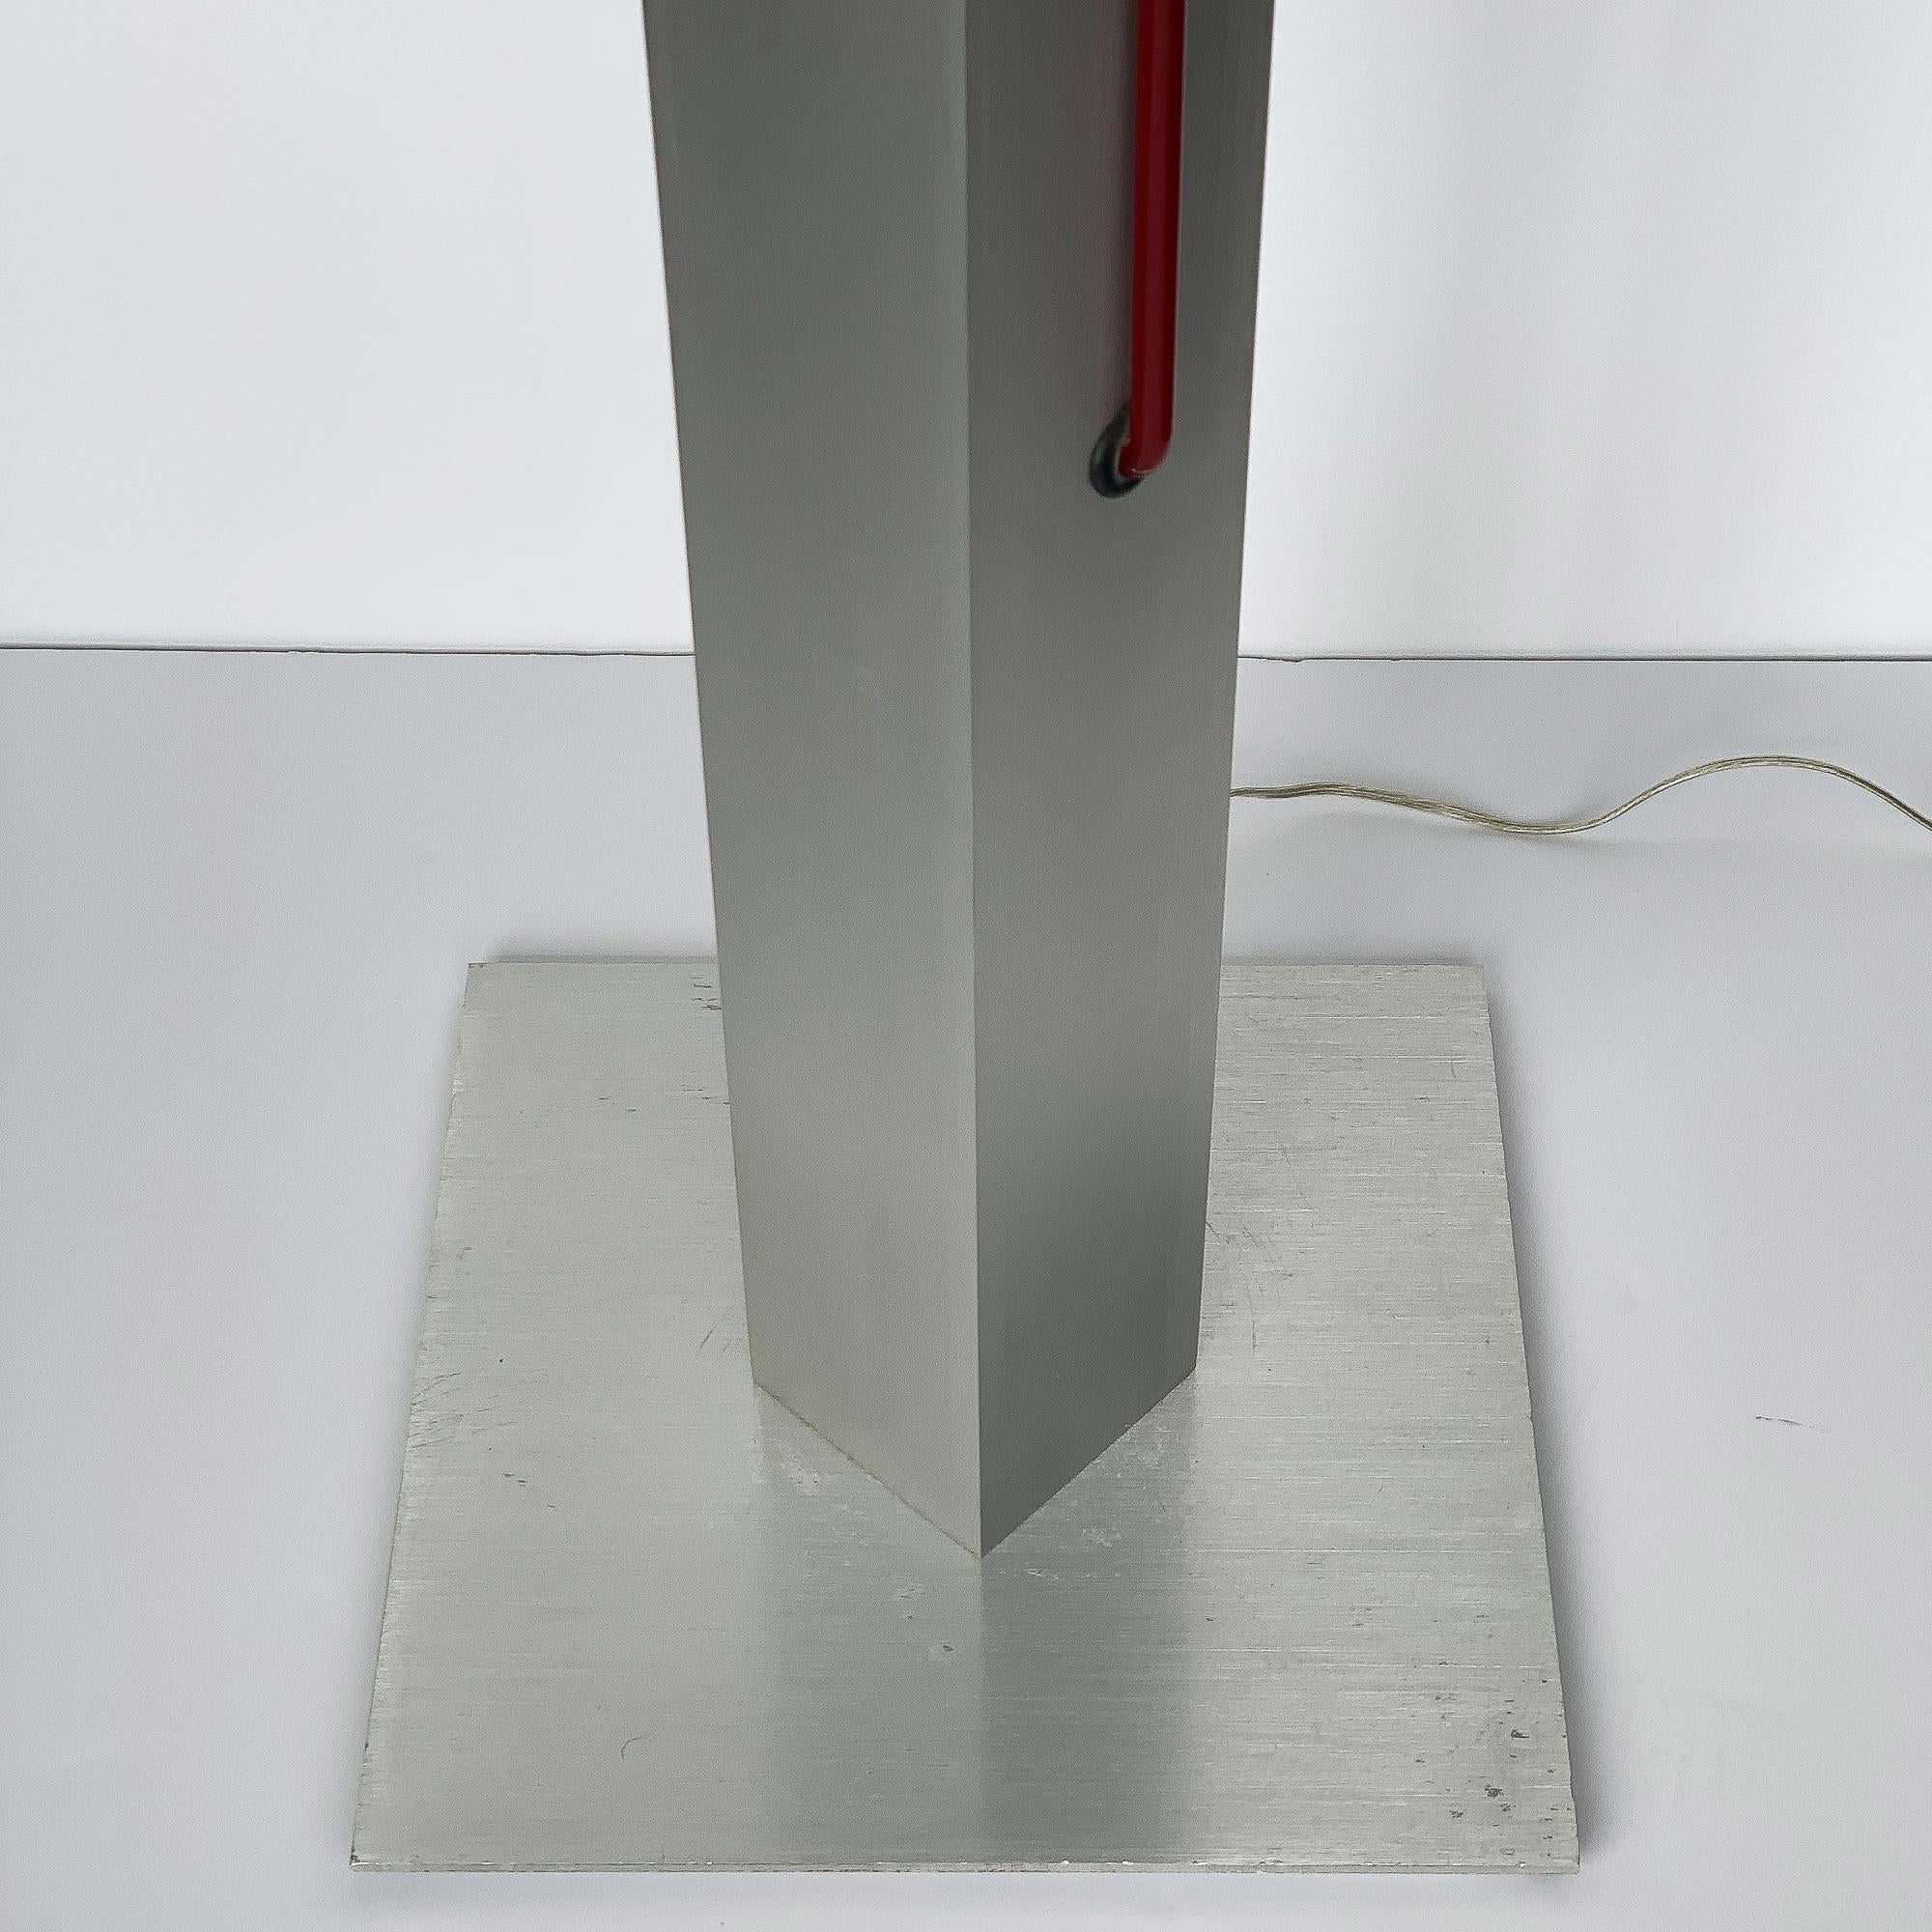 Rare Red Neon and Aluminum Floor Lamp by Rudi Stern and Don Chelsea for Kovacs 10